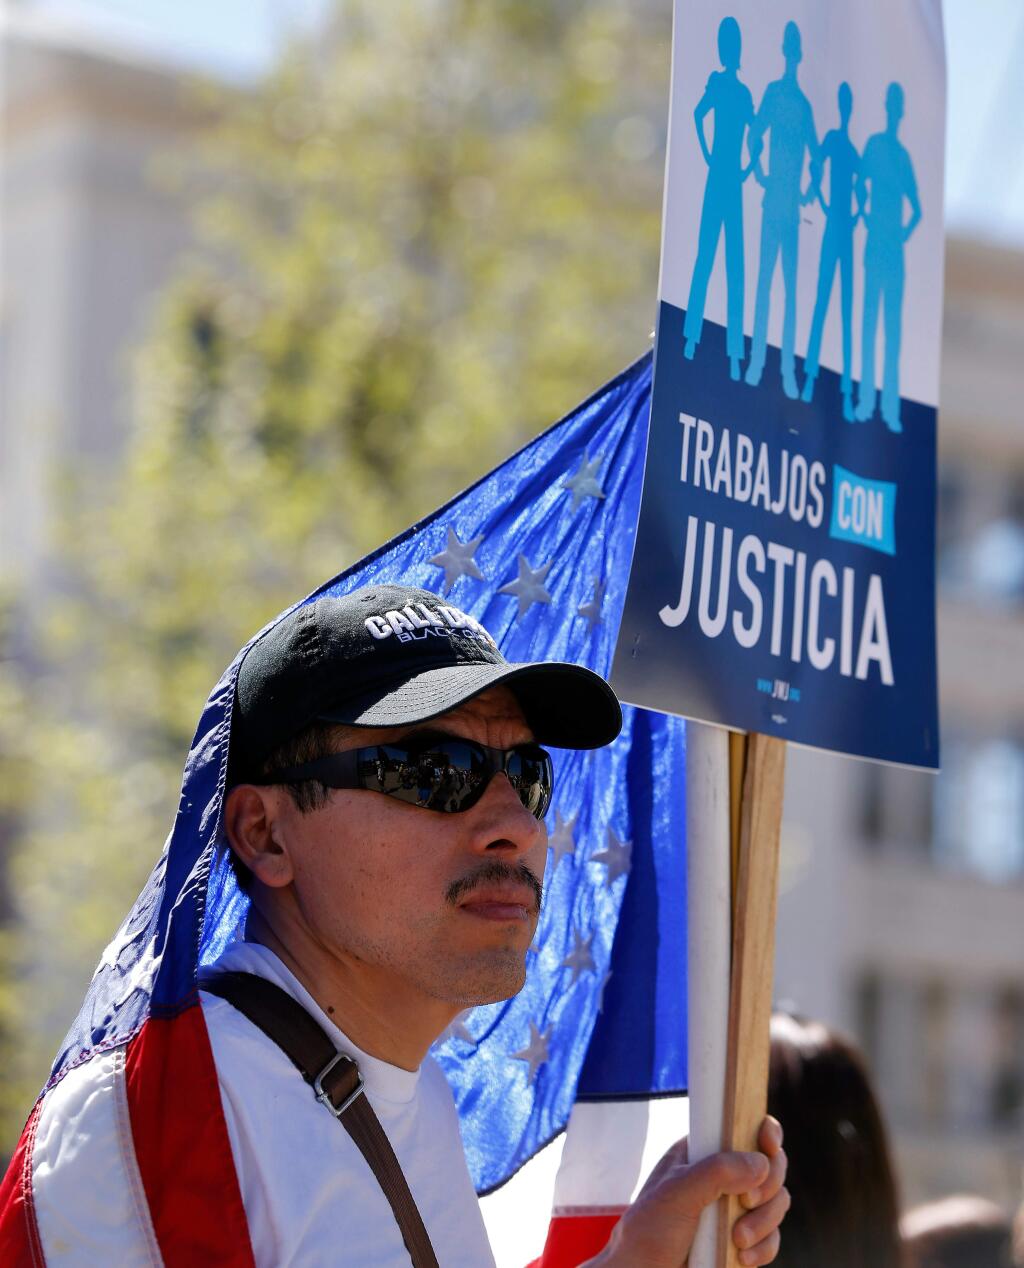 Joe Jimenez's American flag wraps around his shoulders during a march for jobs, justice, and the climate that ended at Old Courthouse Square, in Santa Rosa, California, on Saturday, April 29, 2017. (Alvin Jornada / The Press Democrat)